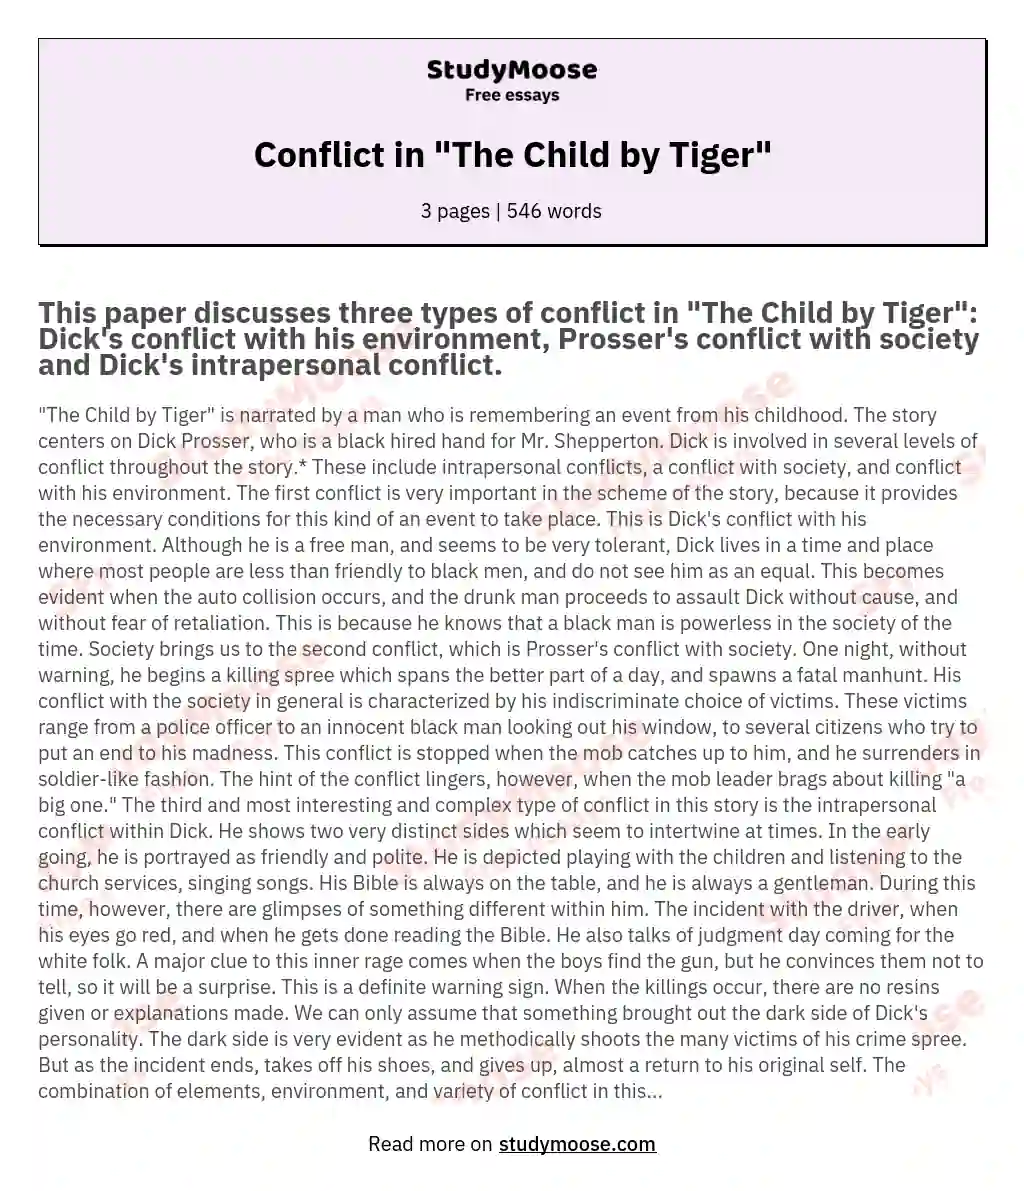 Conflict in "The Child by Tiger" essay